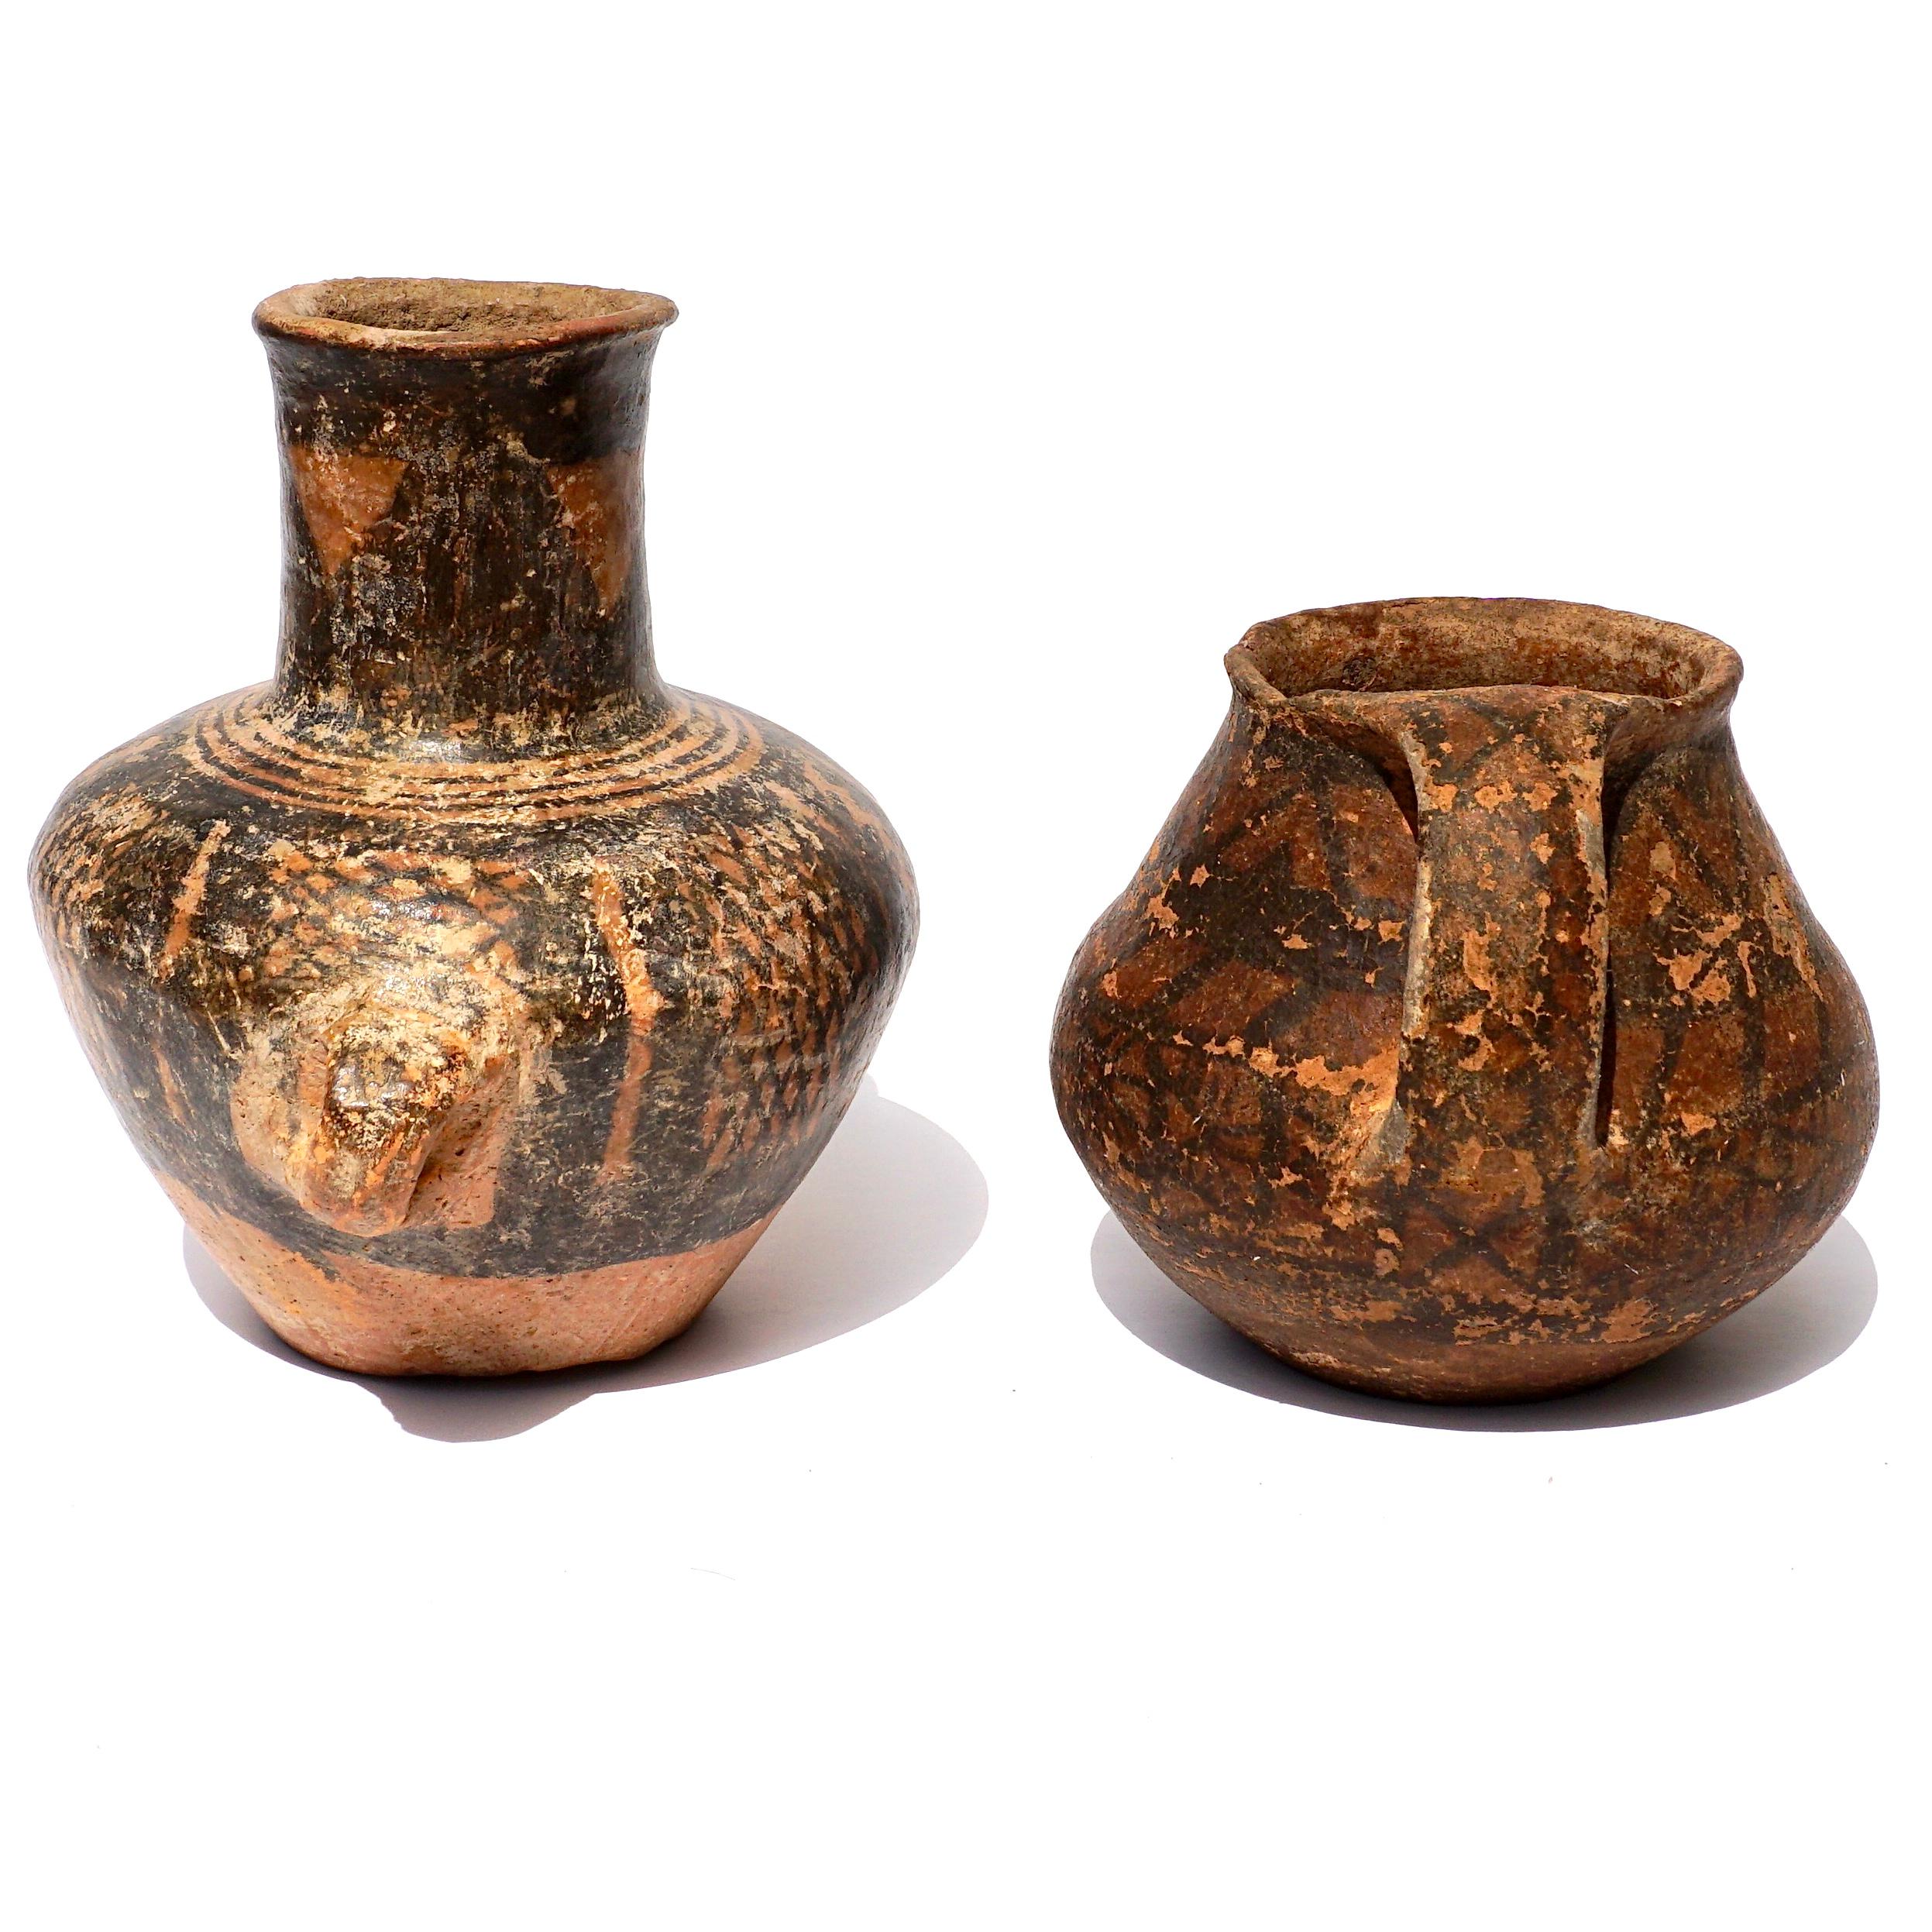 Hand-Crafted Chinese Neolithic Pottery Vases circa 3500 BCE